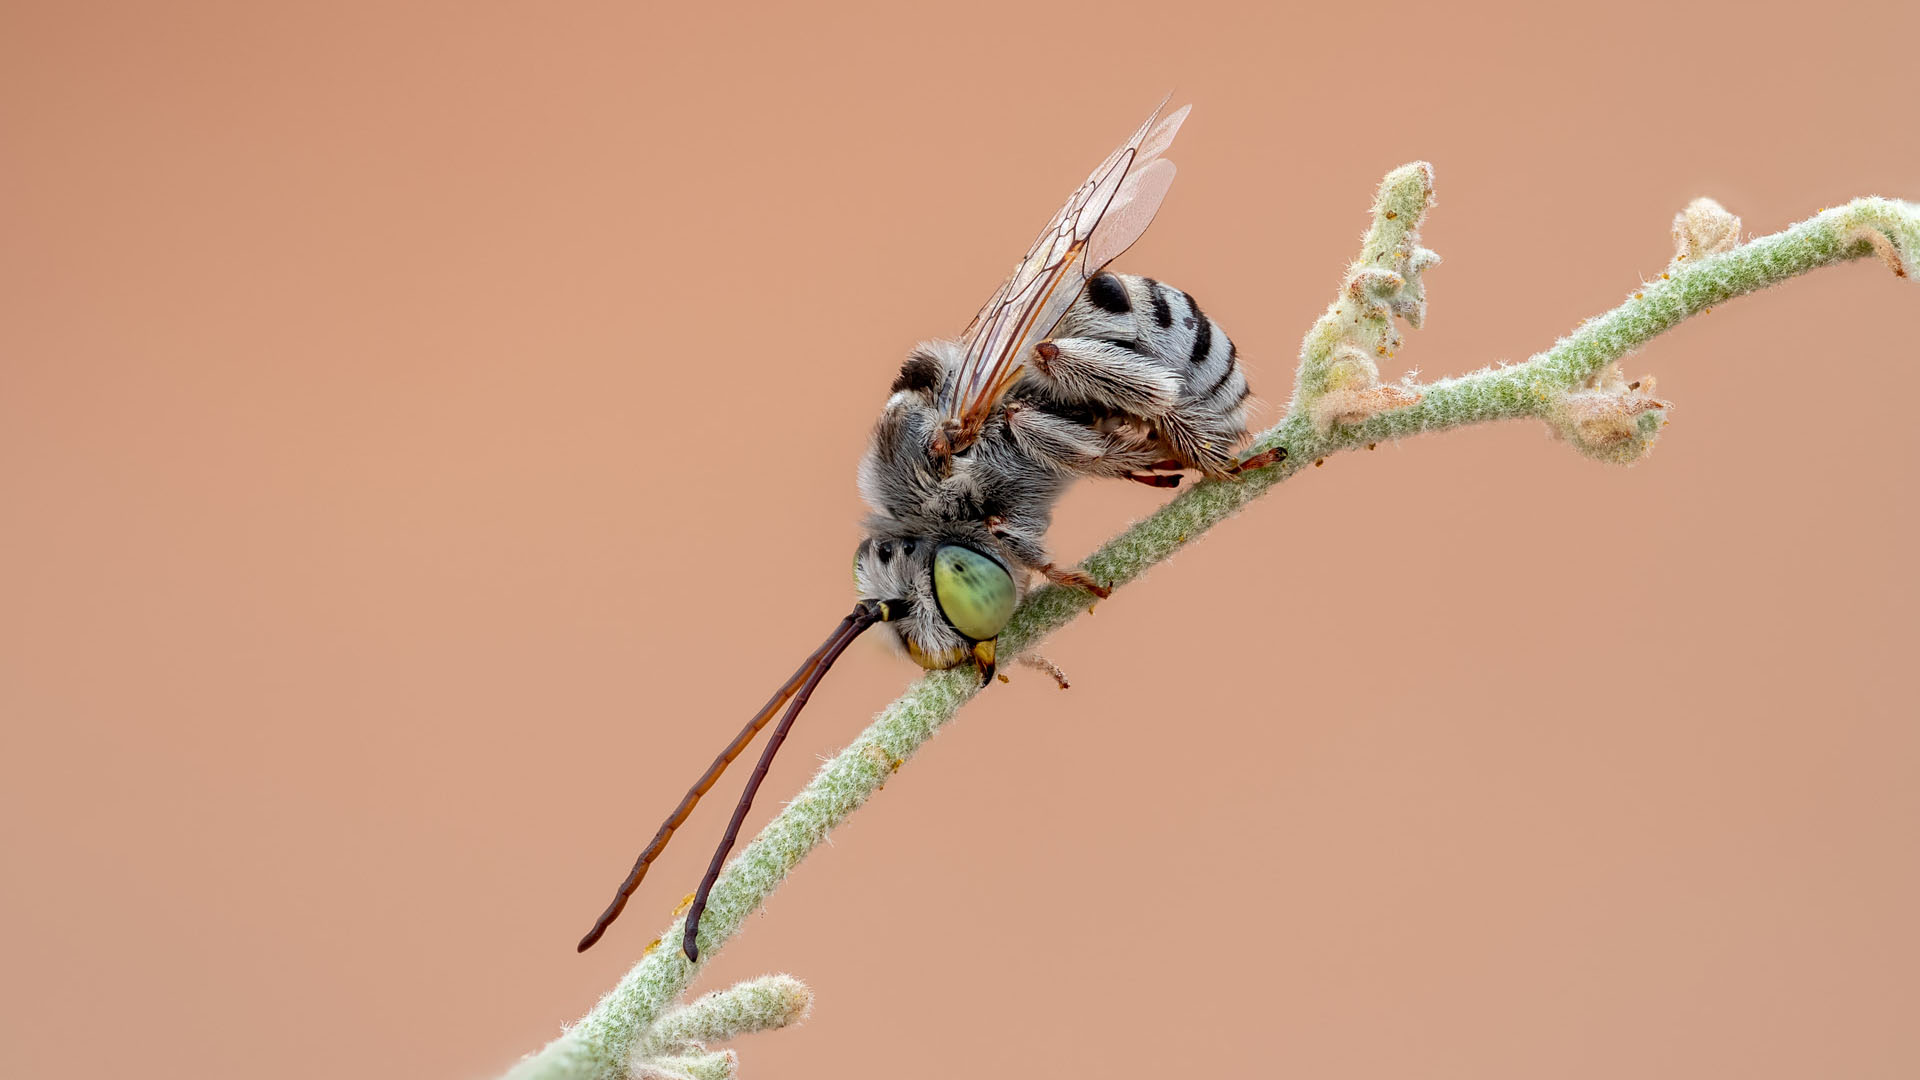 A Sonoran Desert bee (genus Melissodes) identified by The Tucson Bee Collaborative, photographed by Bruce D. Taubert.
